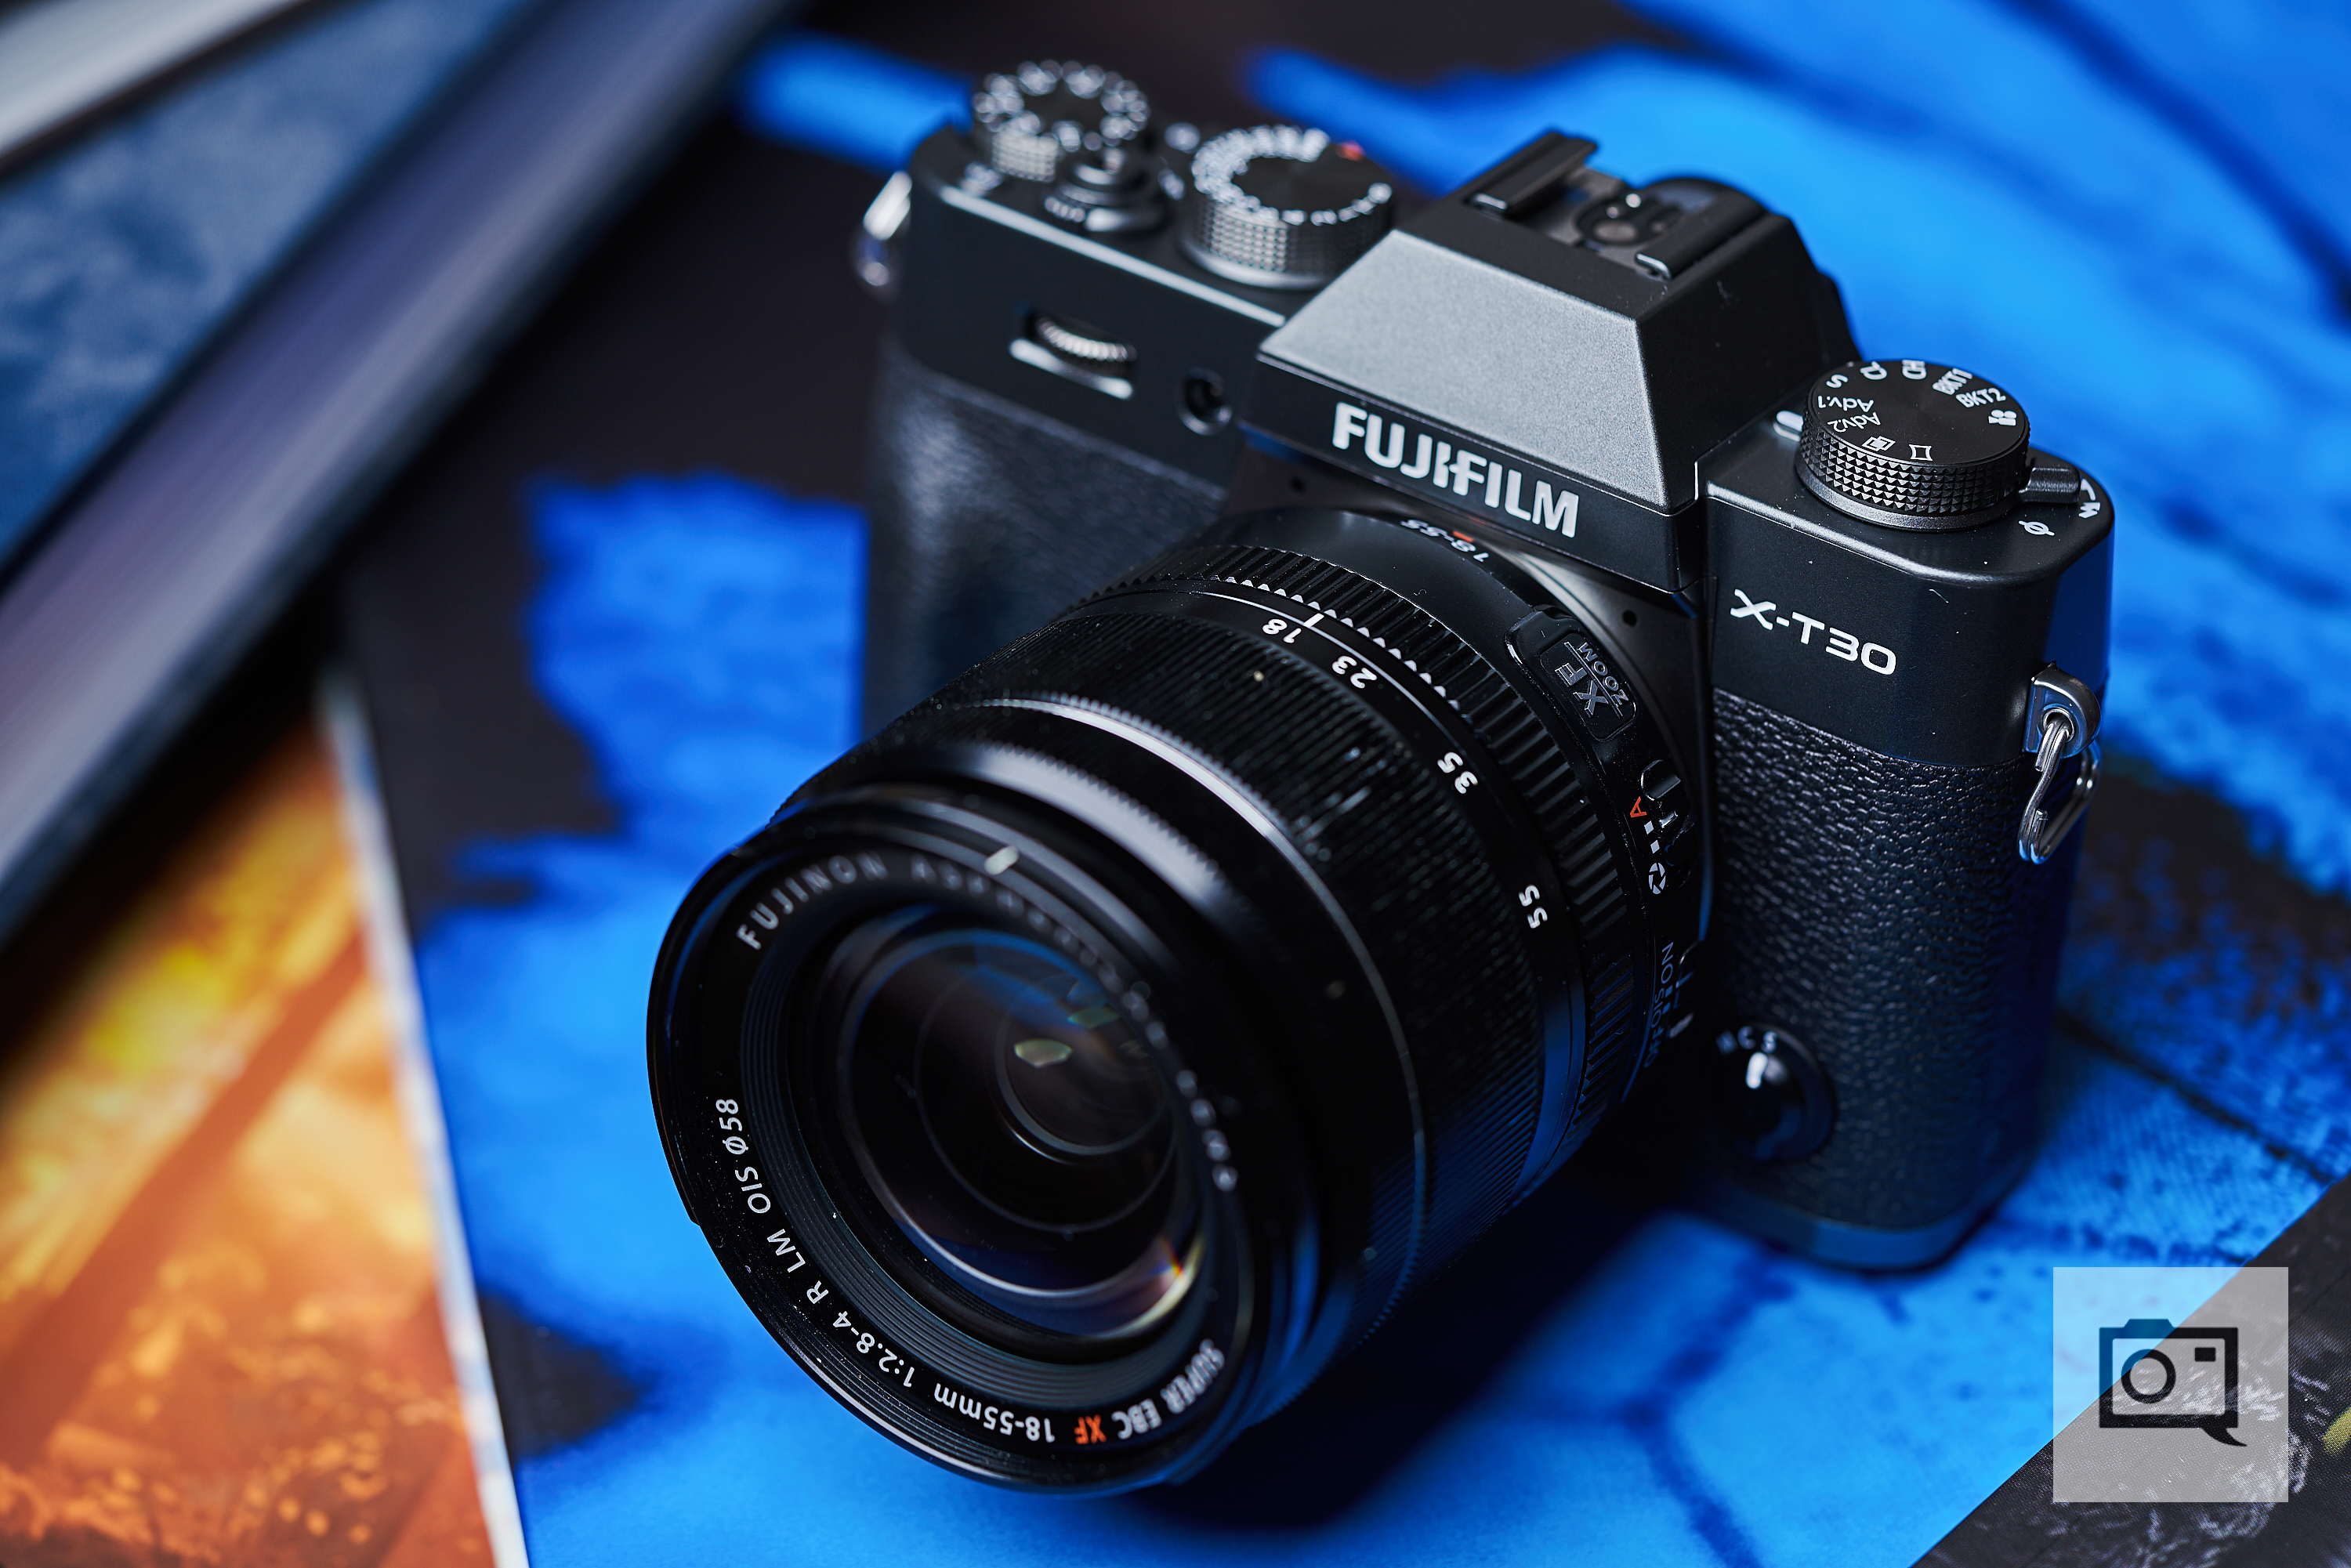 meest dwaas bar First Impressions: Fujifilm X-T30 (Look What They Did to the JoyStick)